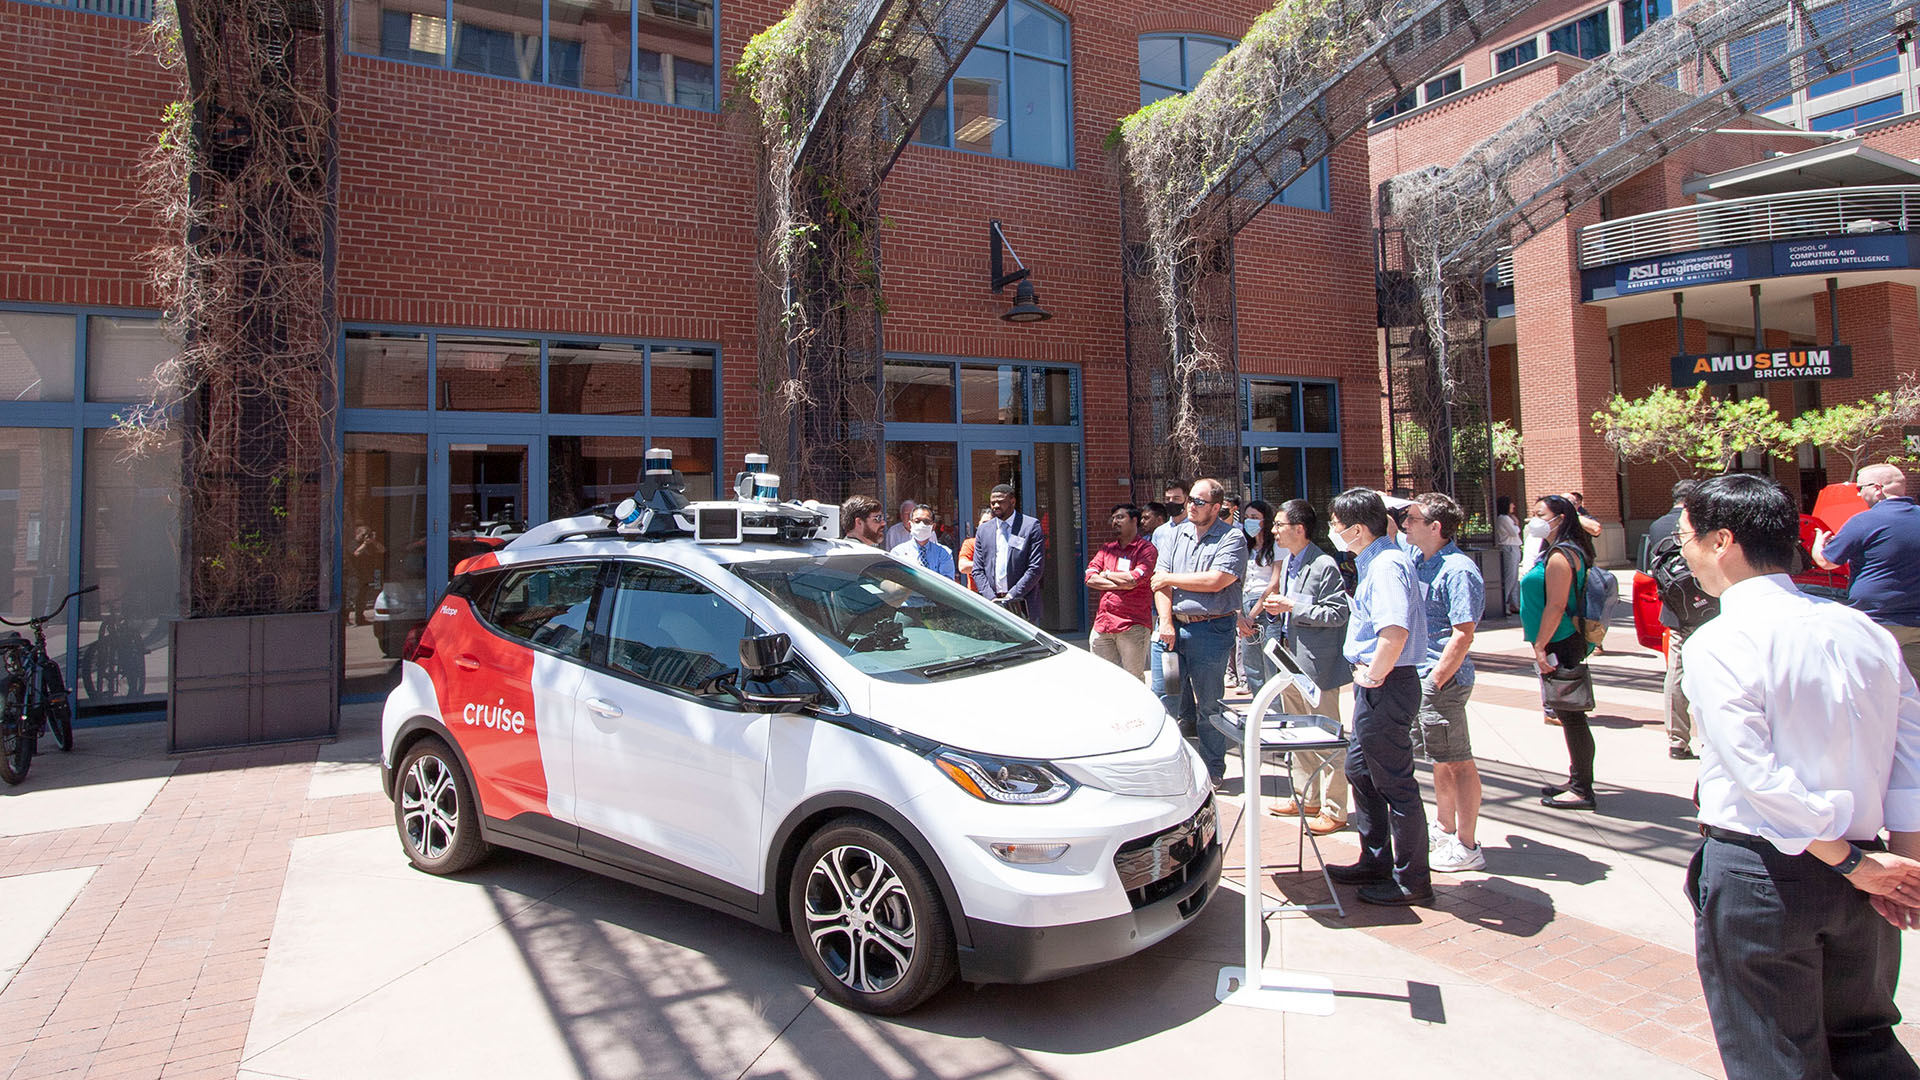 A crowd gathers near an electric autonomous vehicle on the ASU campus at an event